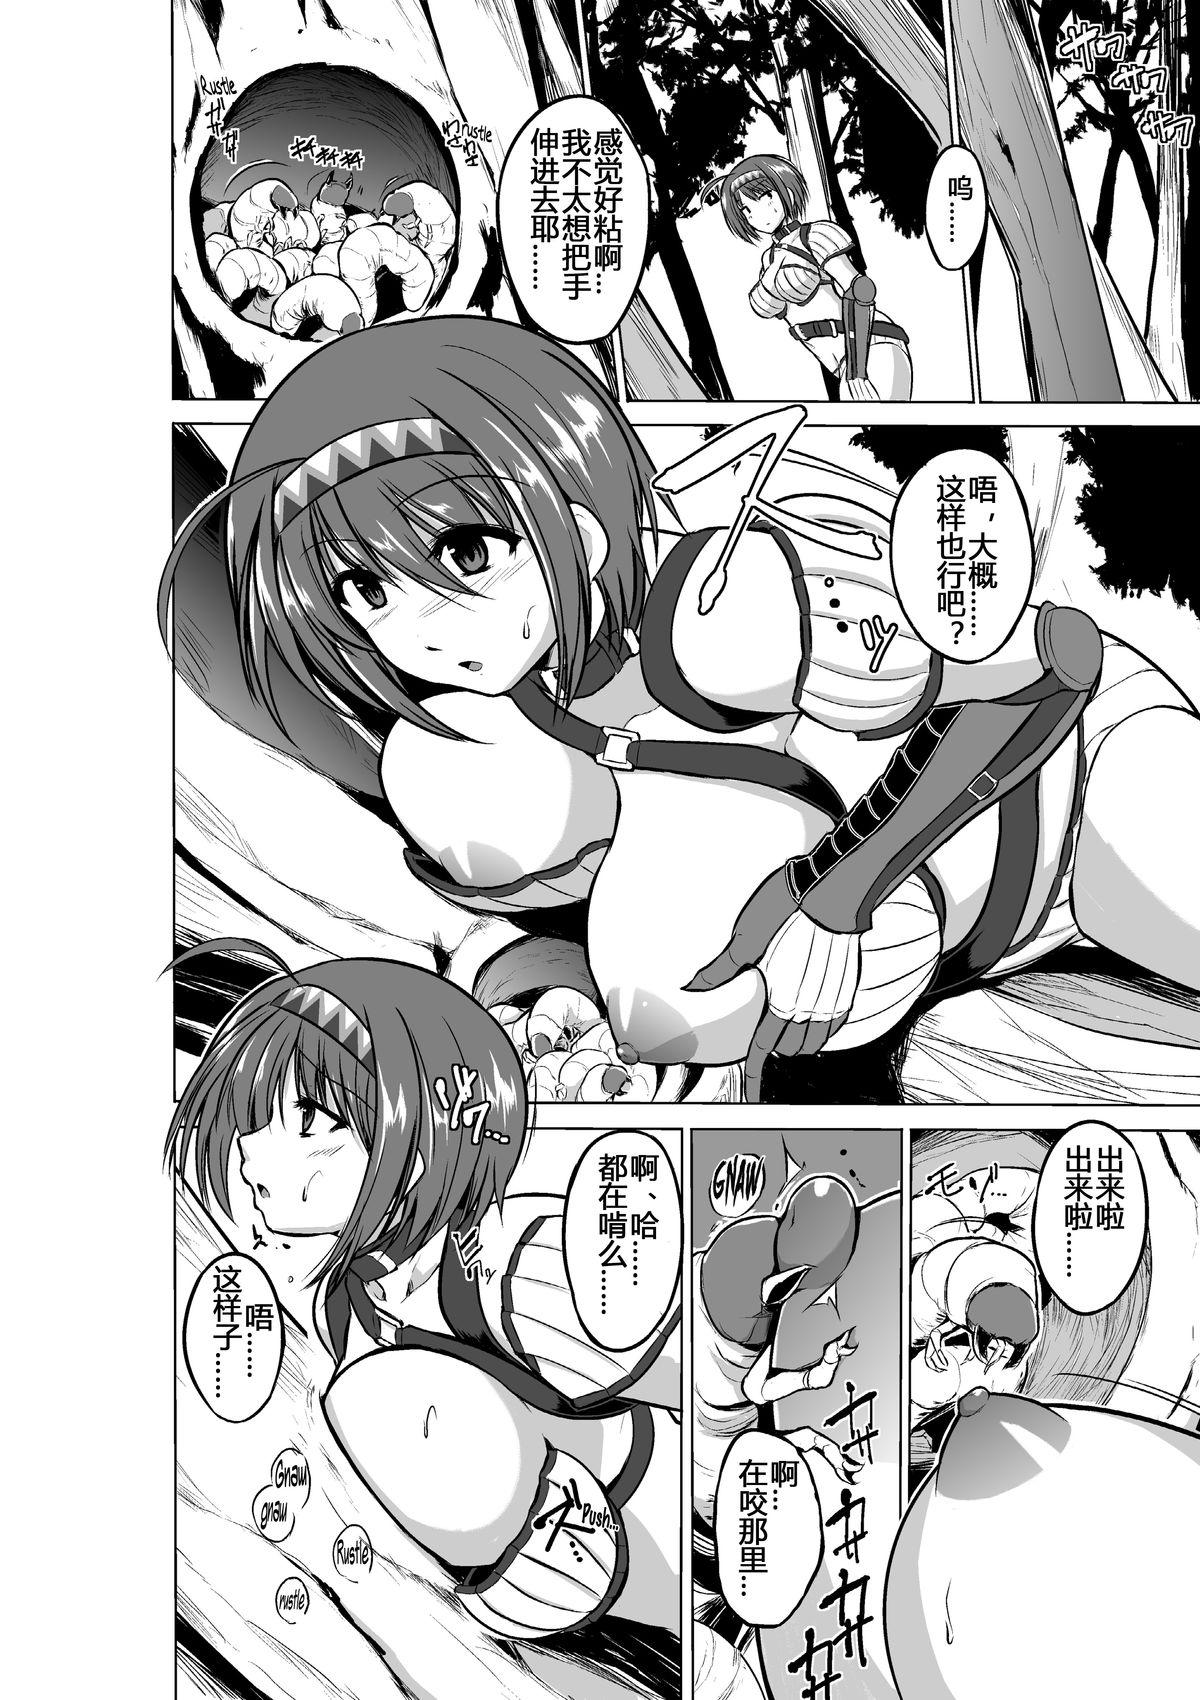 Girl Get Fuck Dungeon Travelers - Chie no Himegoto - Toheart2 Best Blowjob - Page 6